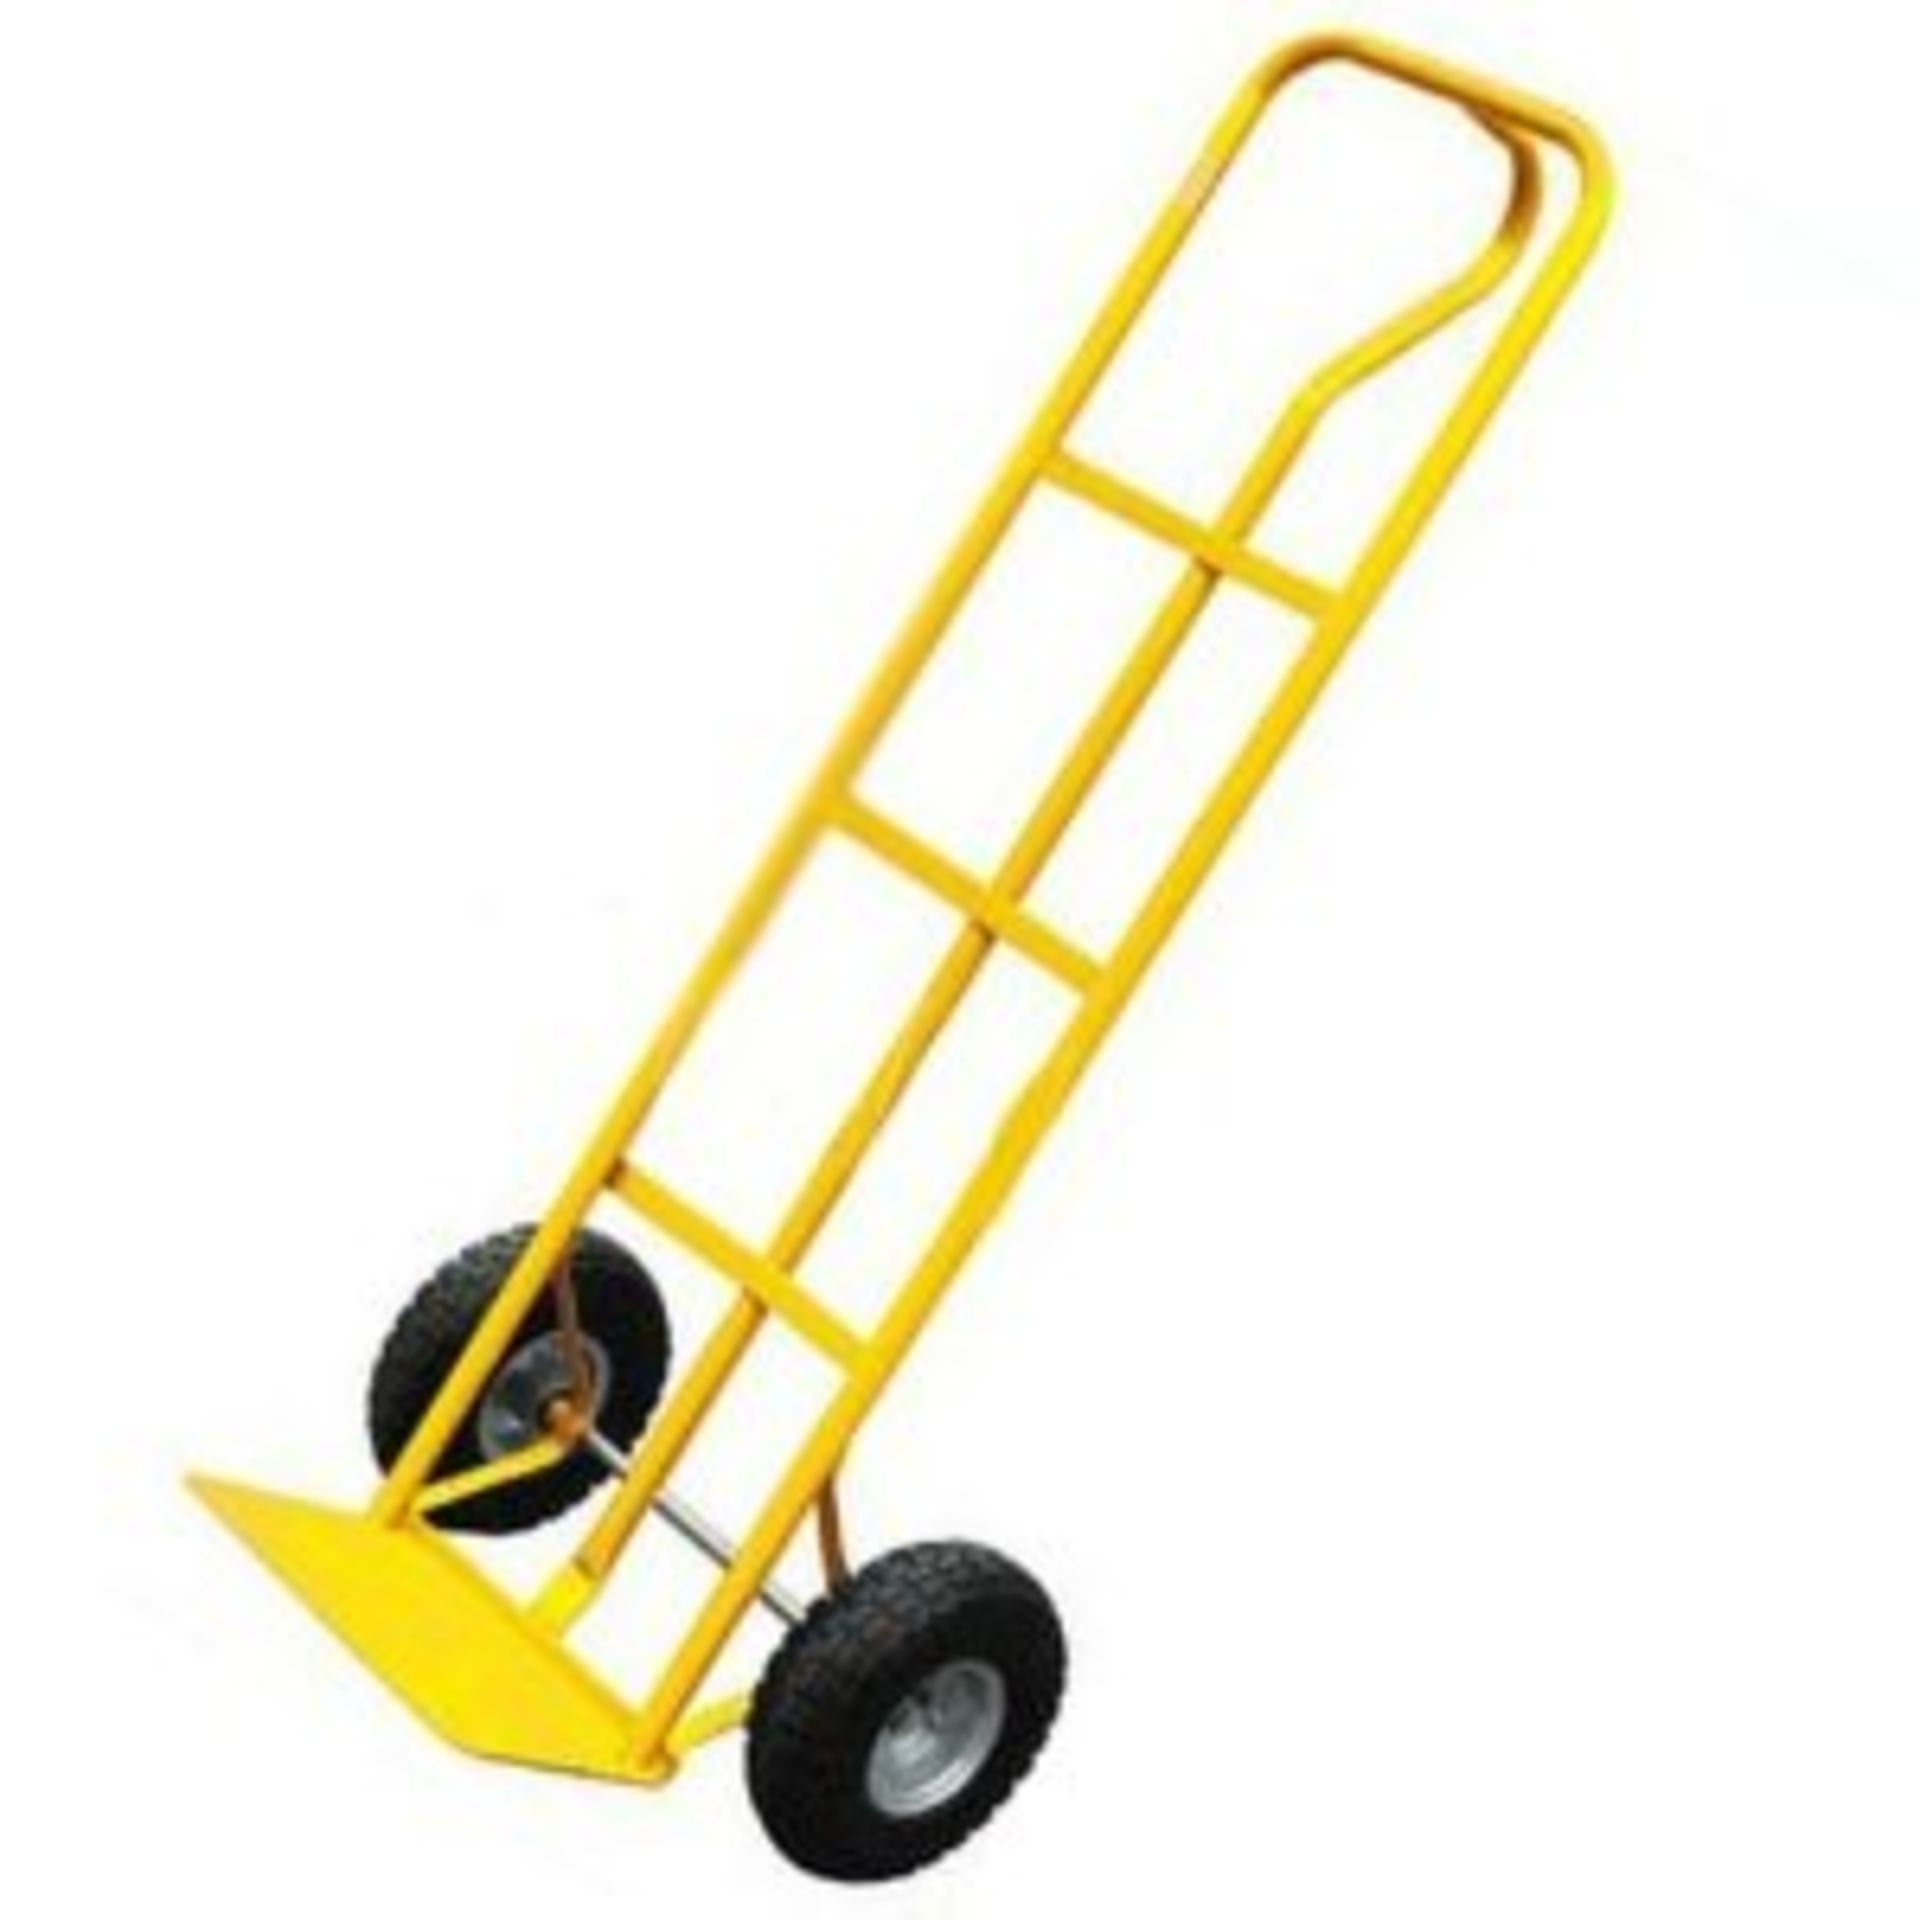 V Brand New Industrial Heavy Duty Sack Barrow/Trolley With Pneumatic Tyres X 2 YOUR BID PRICE TO